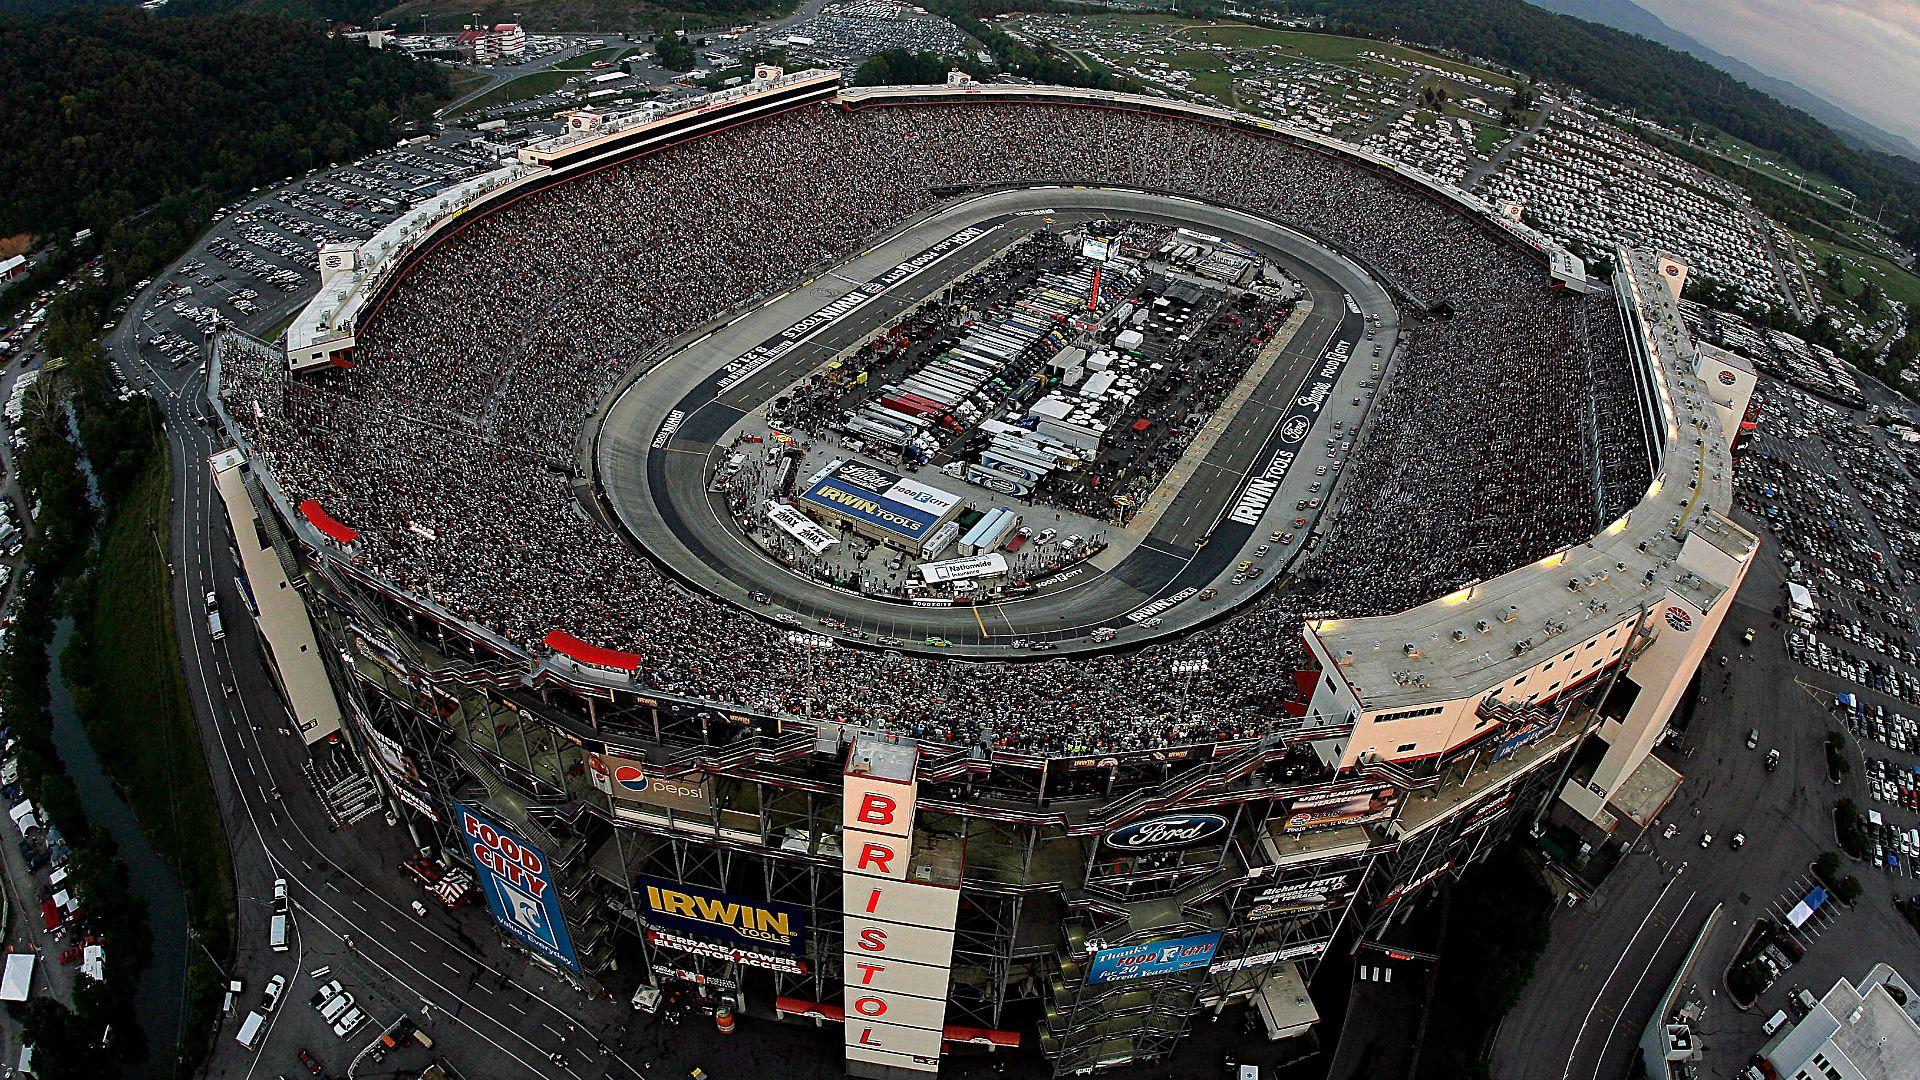 NASCAR at Bristol: TV schedule, forecast, qualifying drivers